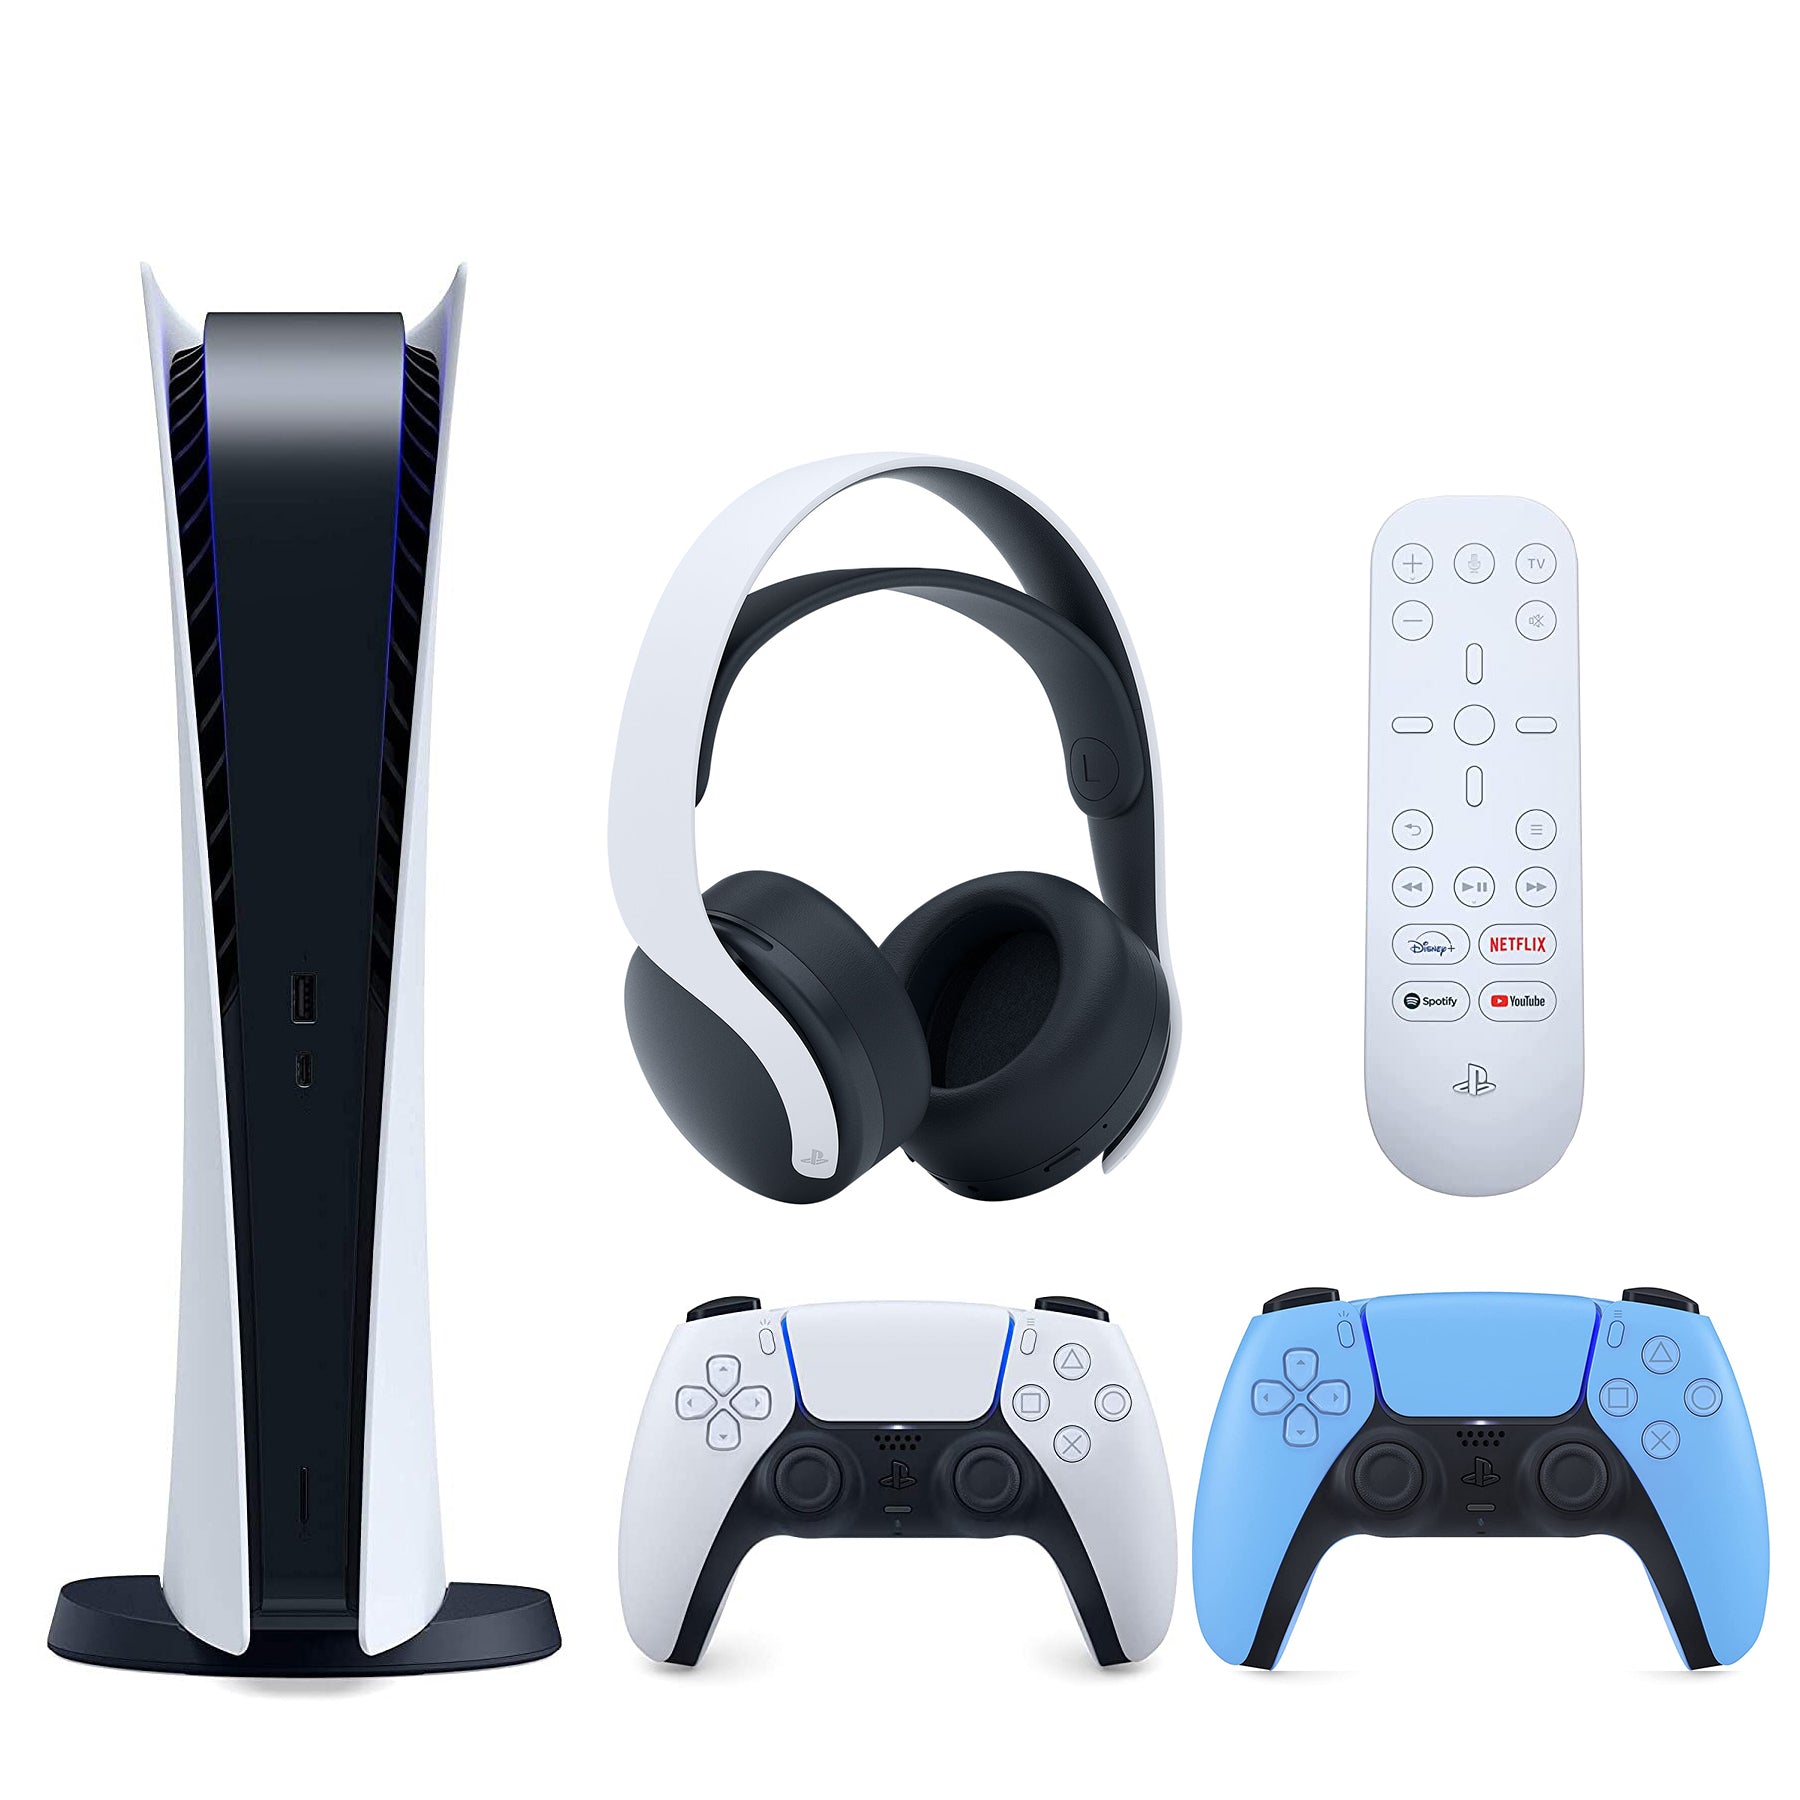 Sony Playstation 5 Digital Version (PS5 Digital) with Extra Starlight Blue Controller, White PULSE 3D Headset and Media Remote Bundle - Pro-Distributing